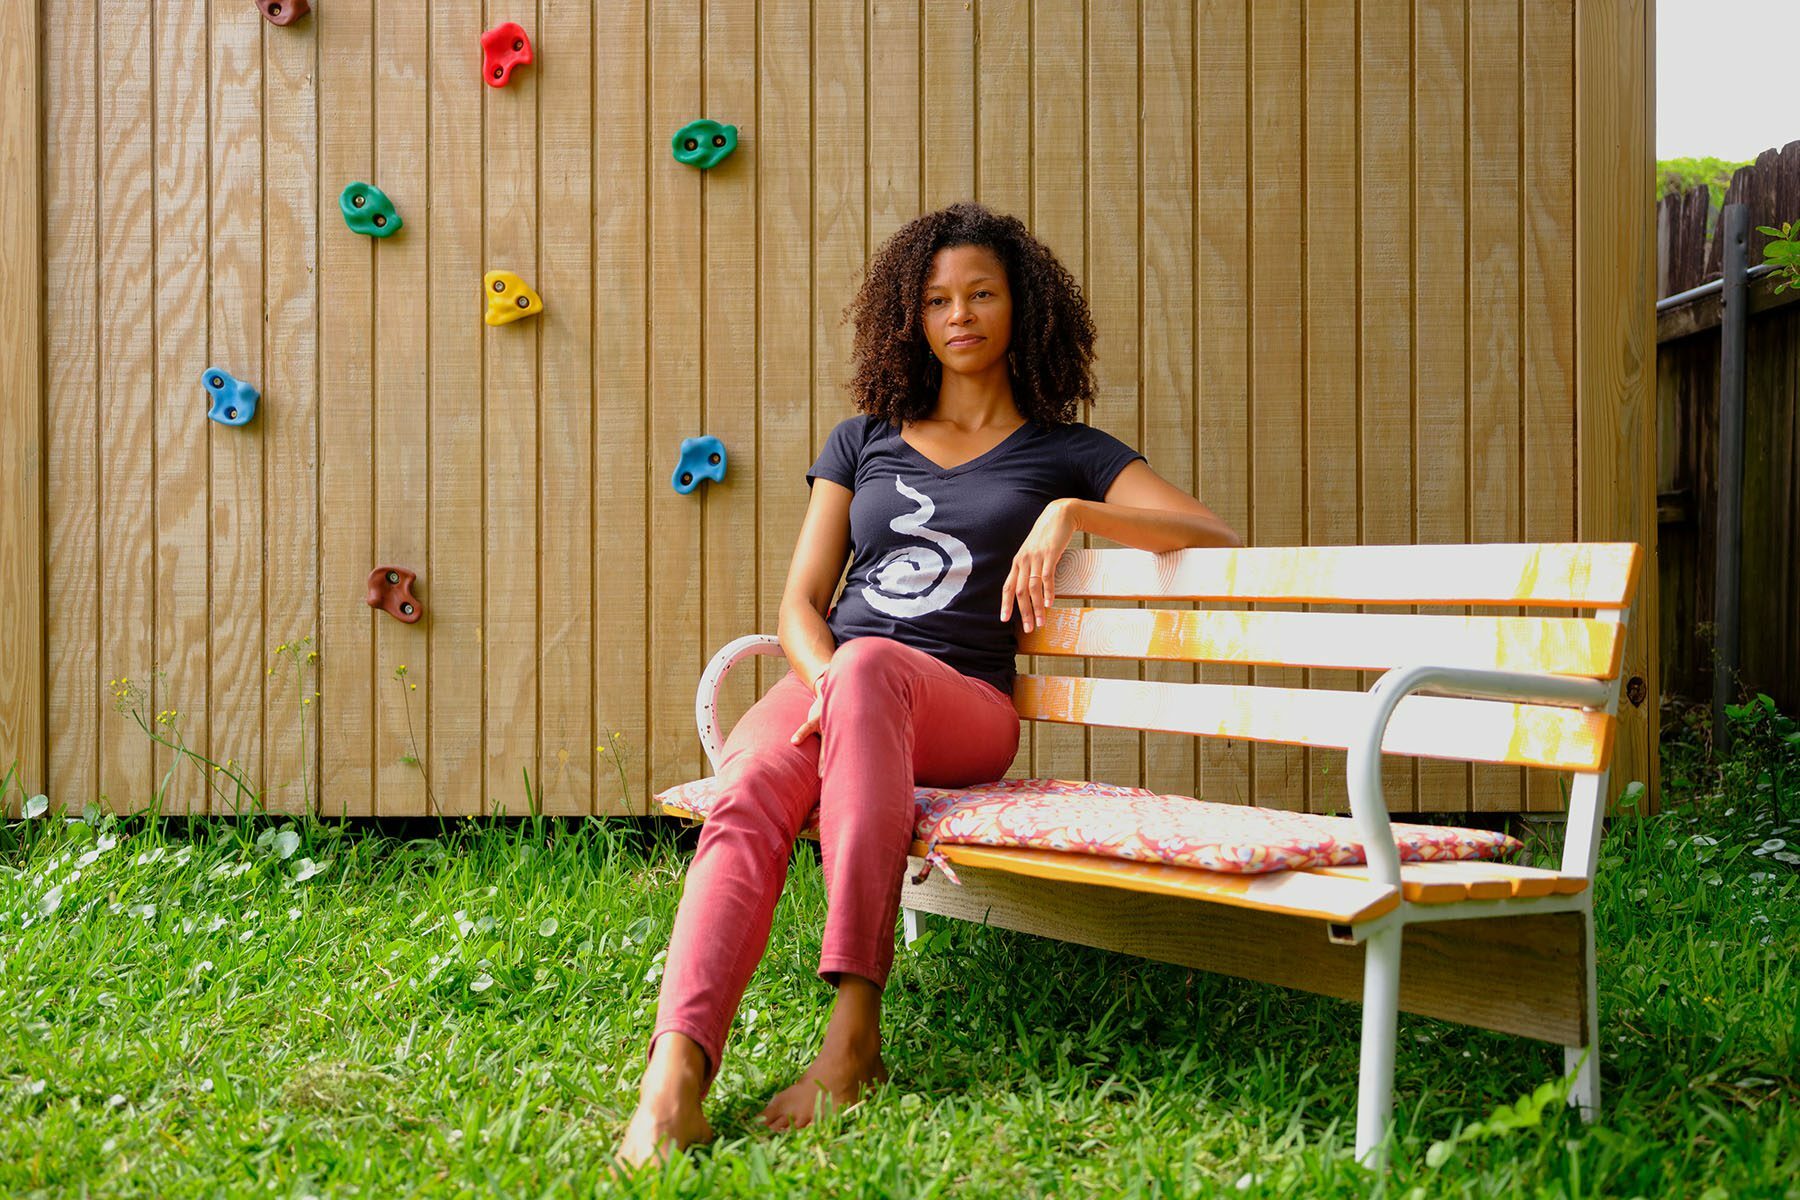 Malaika Ludman smiles slightly as she sits on a bench in her backyard.